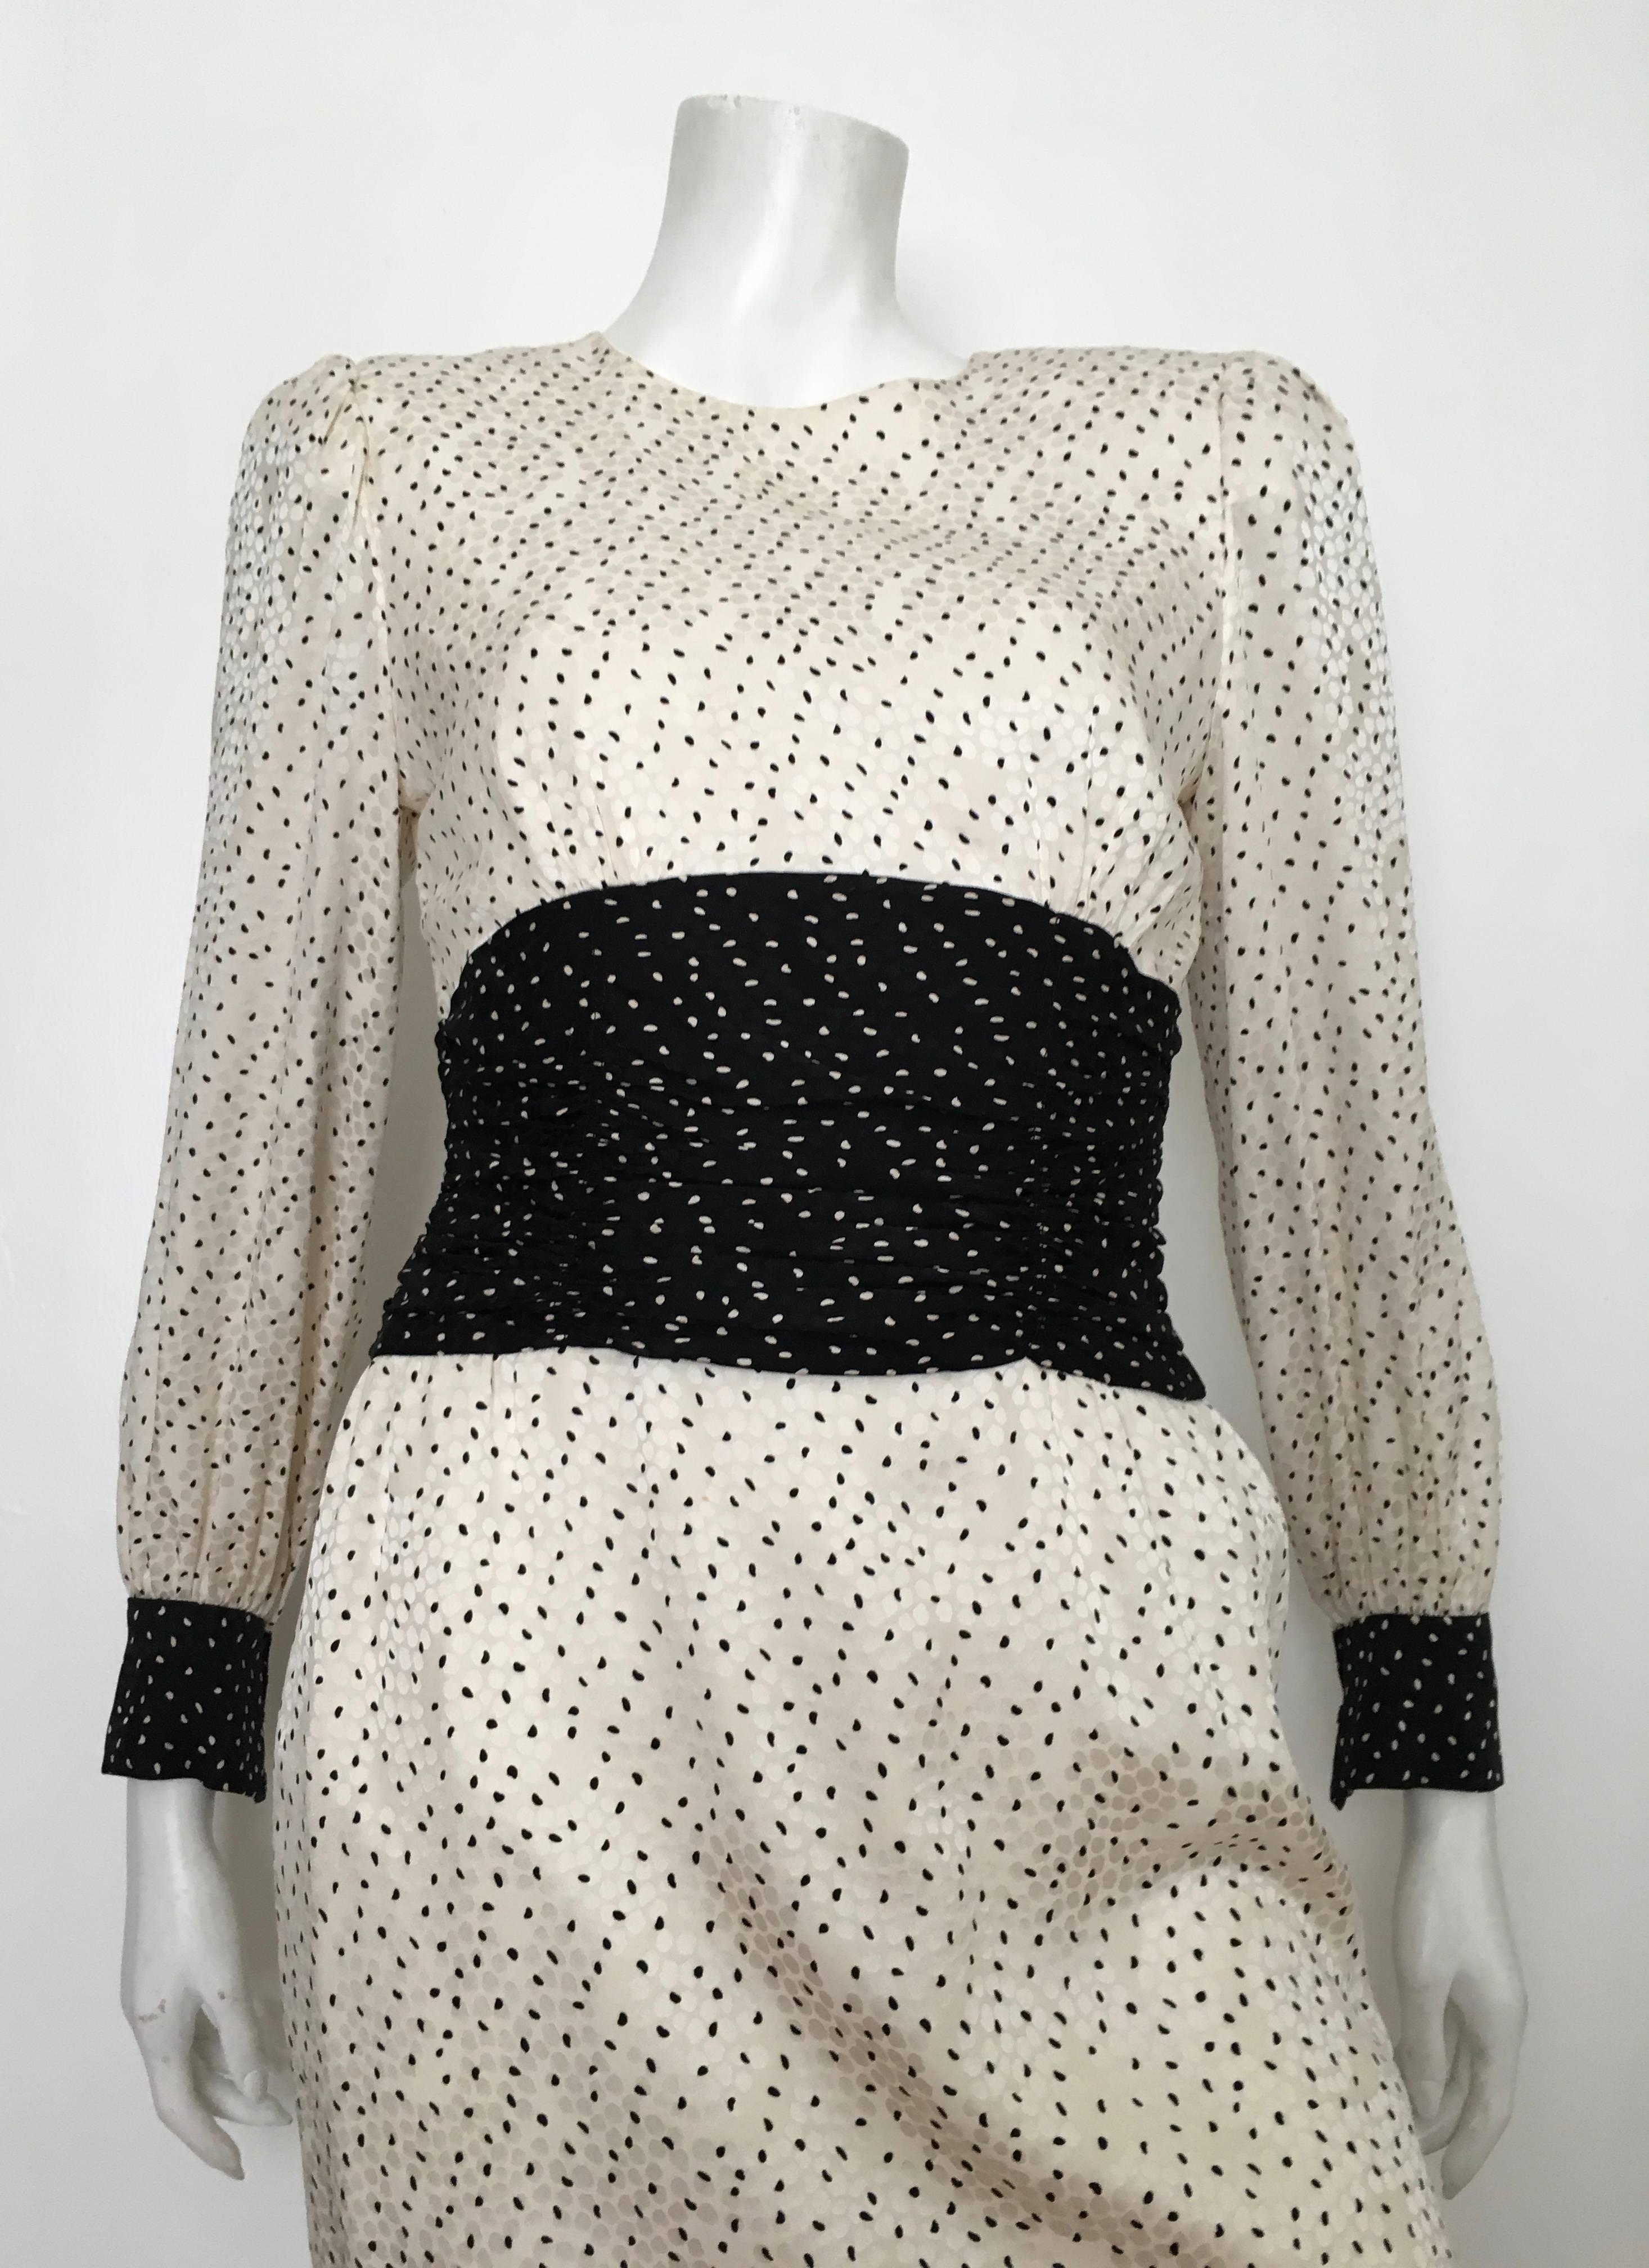 Carolina Herrera for Neiman Marcus 1980s cream & black silk dress is a size 6.  Ladies please grab your trusted tape measure so you can properly measure your bust, waist & hips to make certain this will fit you the way Carolina wanted it to.